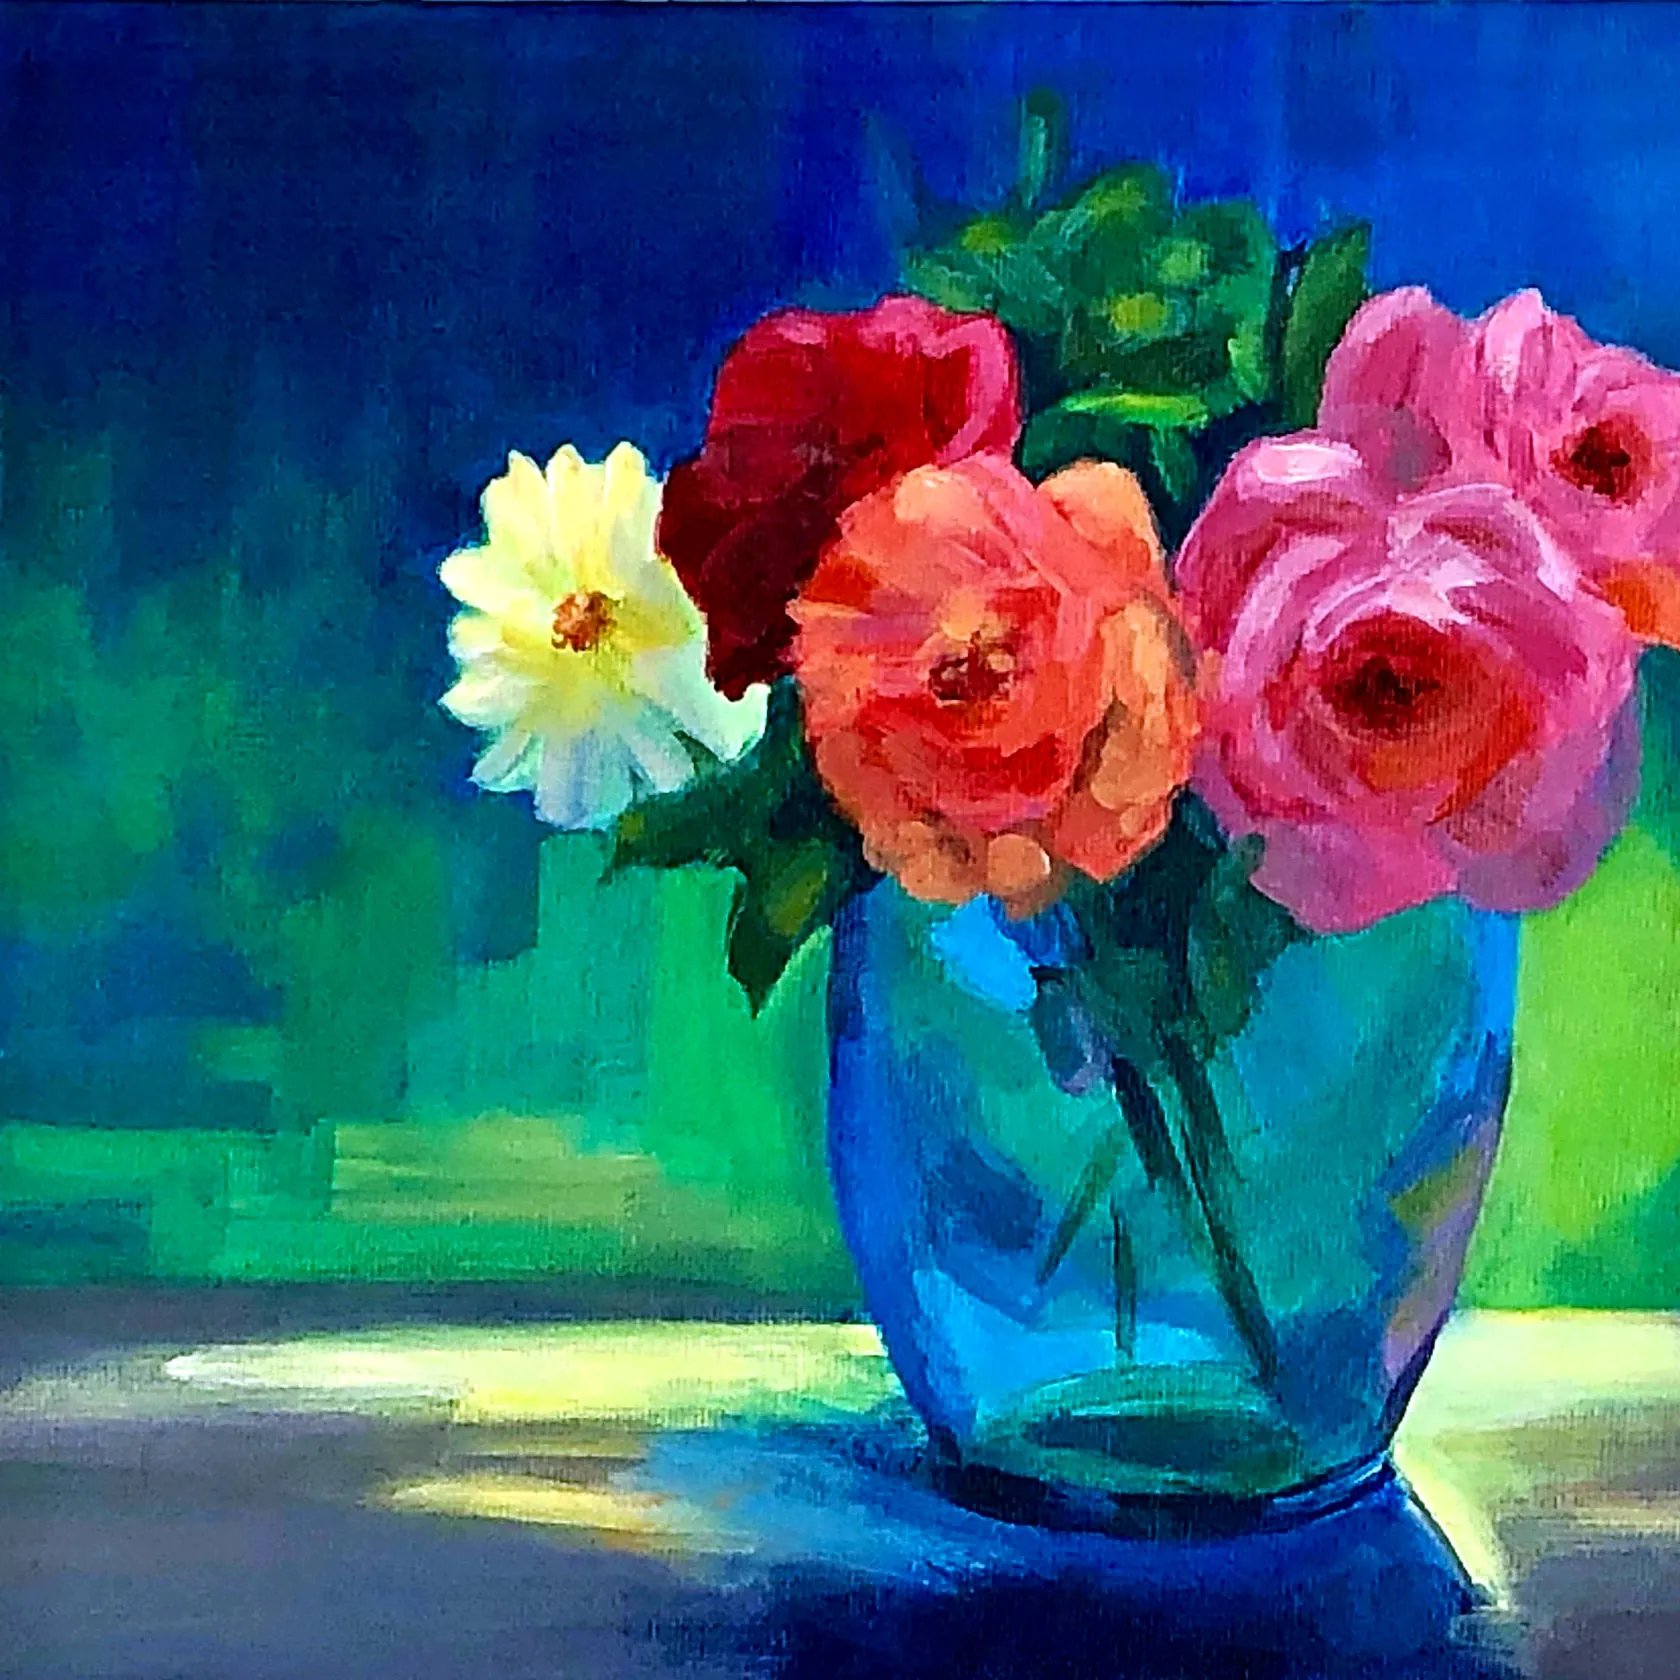 acrylic painting of roses in a vase with green background by artist Shona Jones